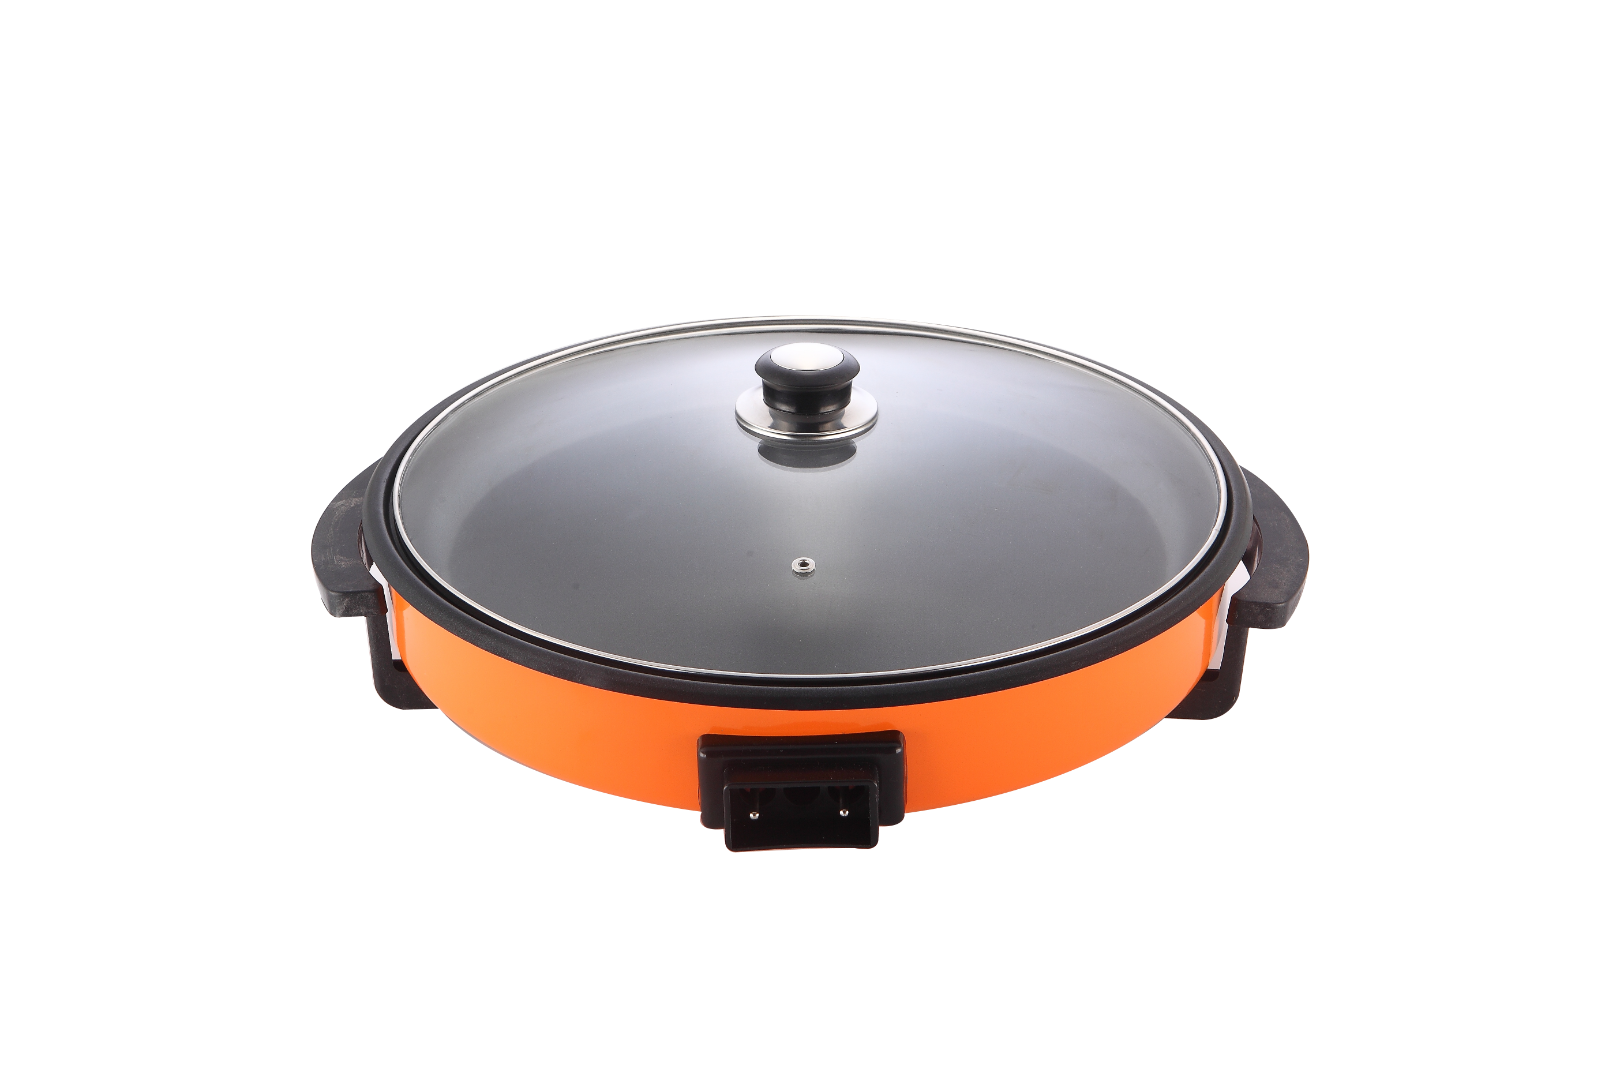 40cm blue round nonstick coating electric pizza pan electric with 4cm depth KH-P40